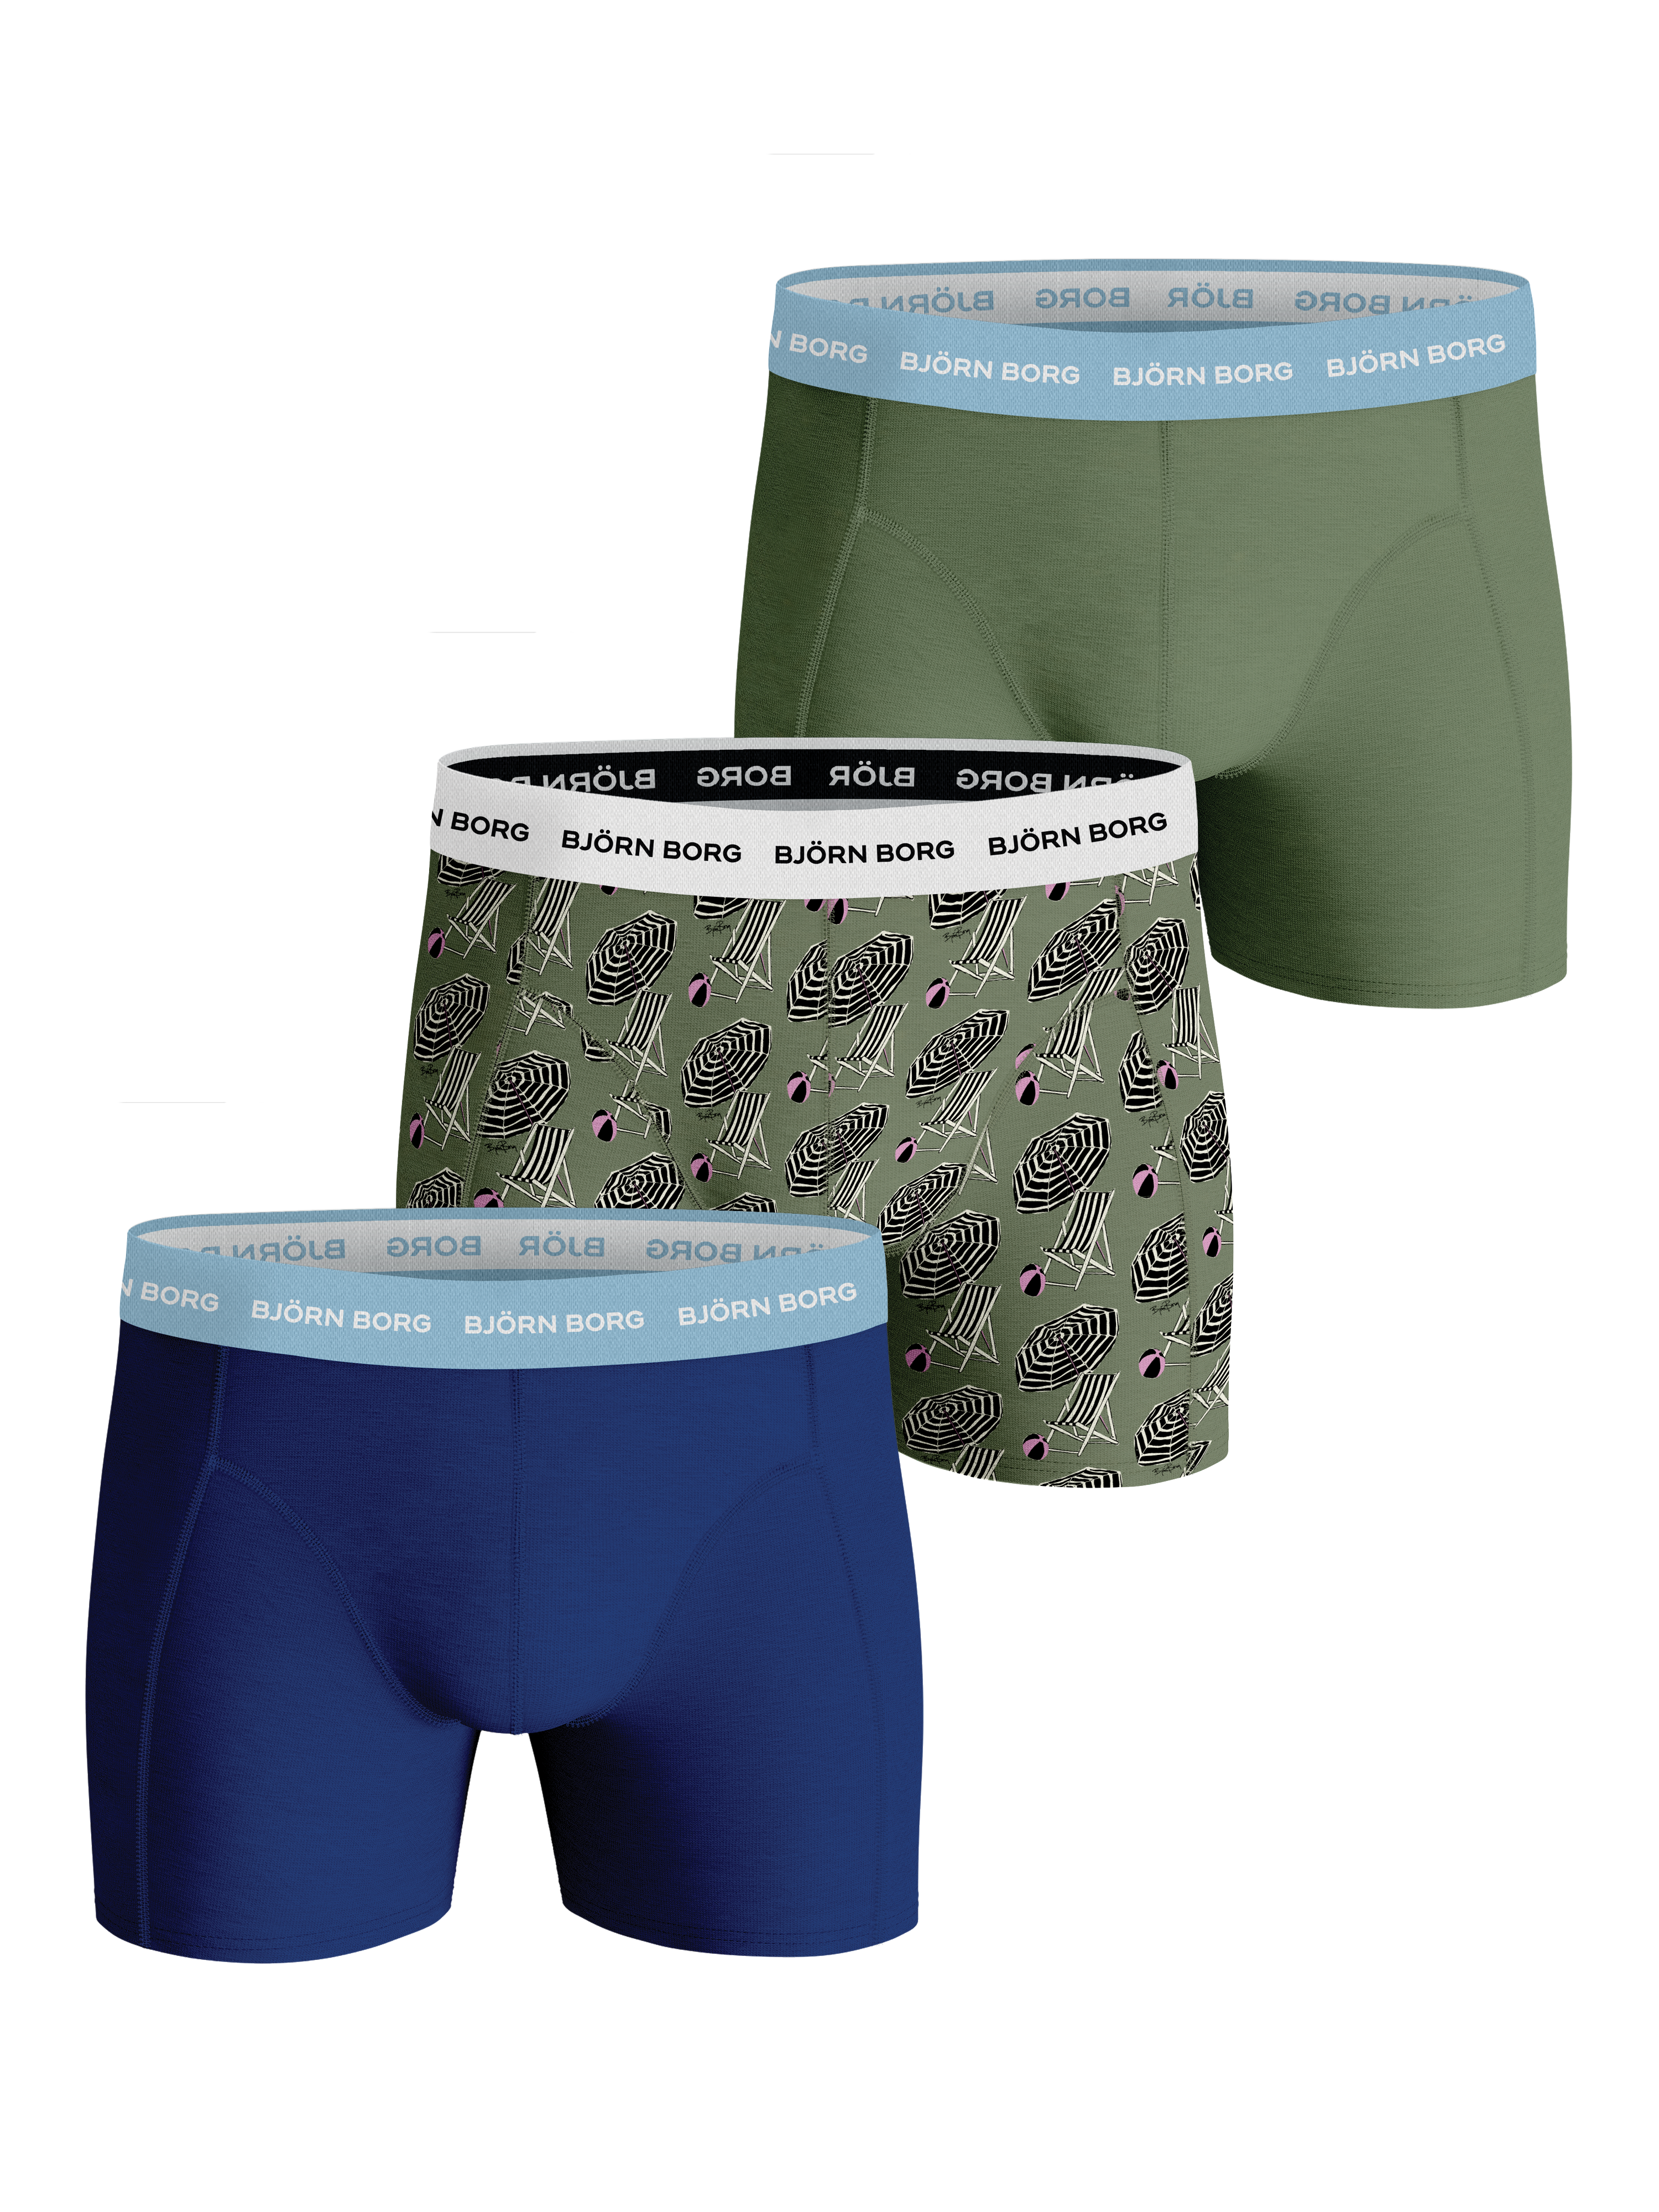 Björn Borg Mens Shorts Boxer Briefs Underwear Many Choices 3-PACK 